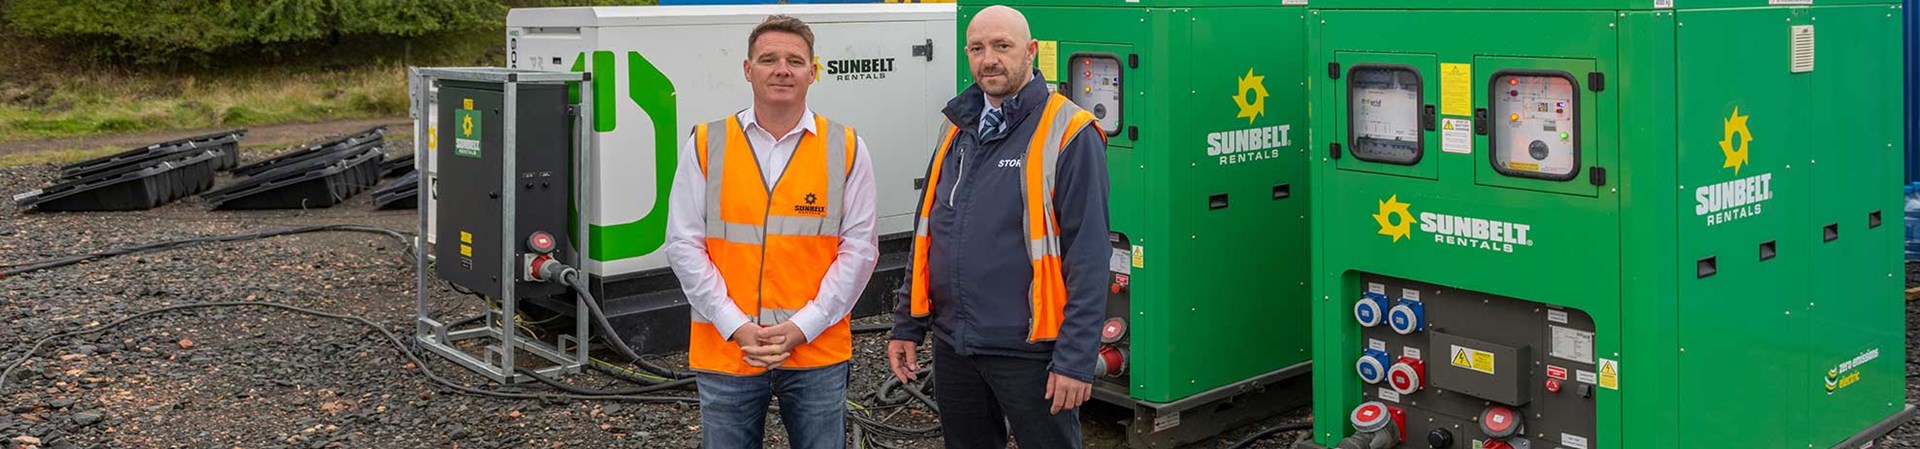 Two Project Managers Stood In front Of Battery Storage Units And A Hybrid Generator